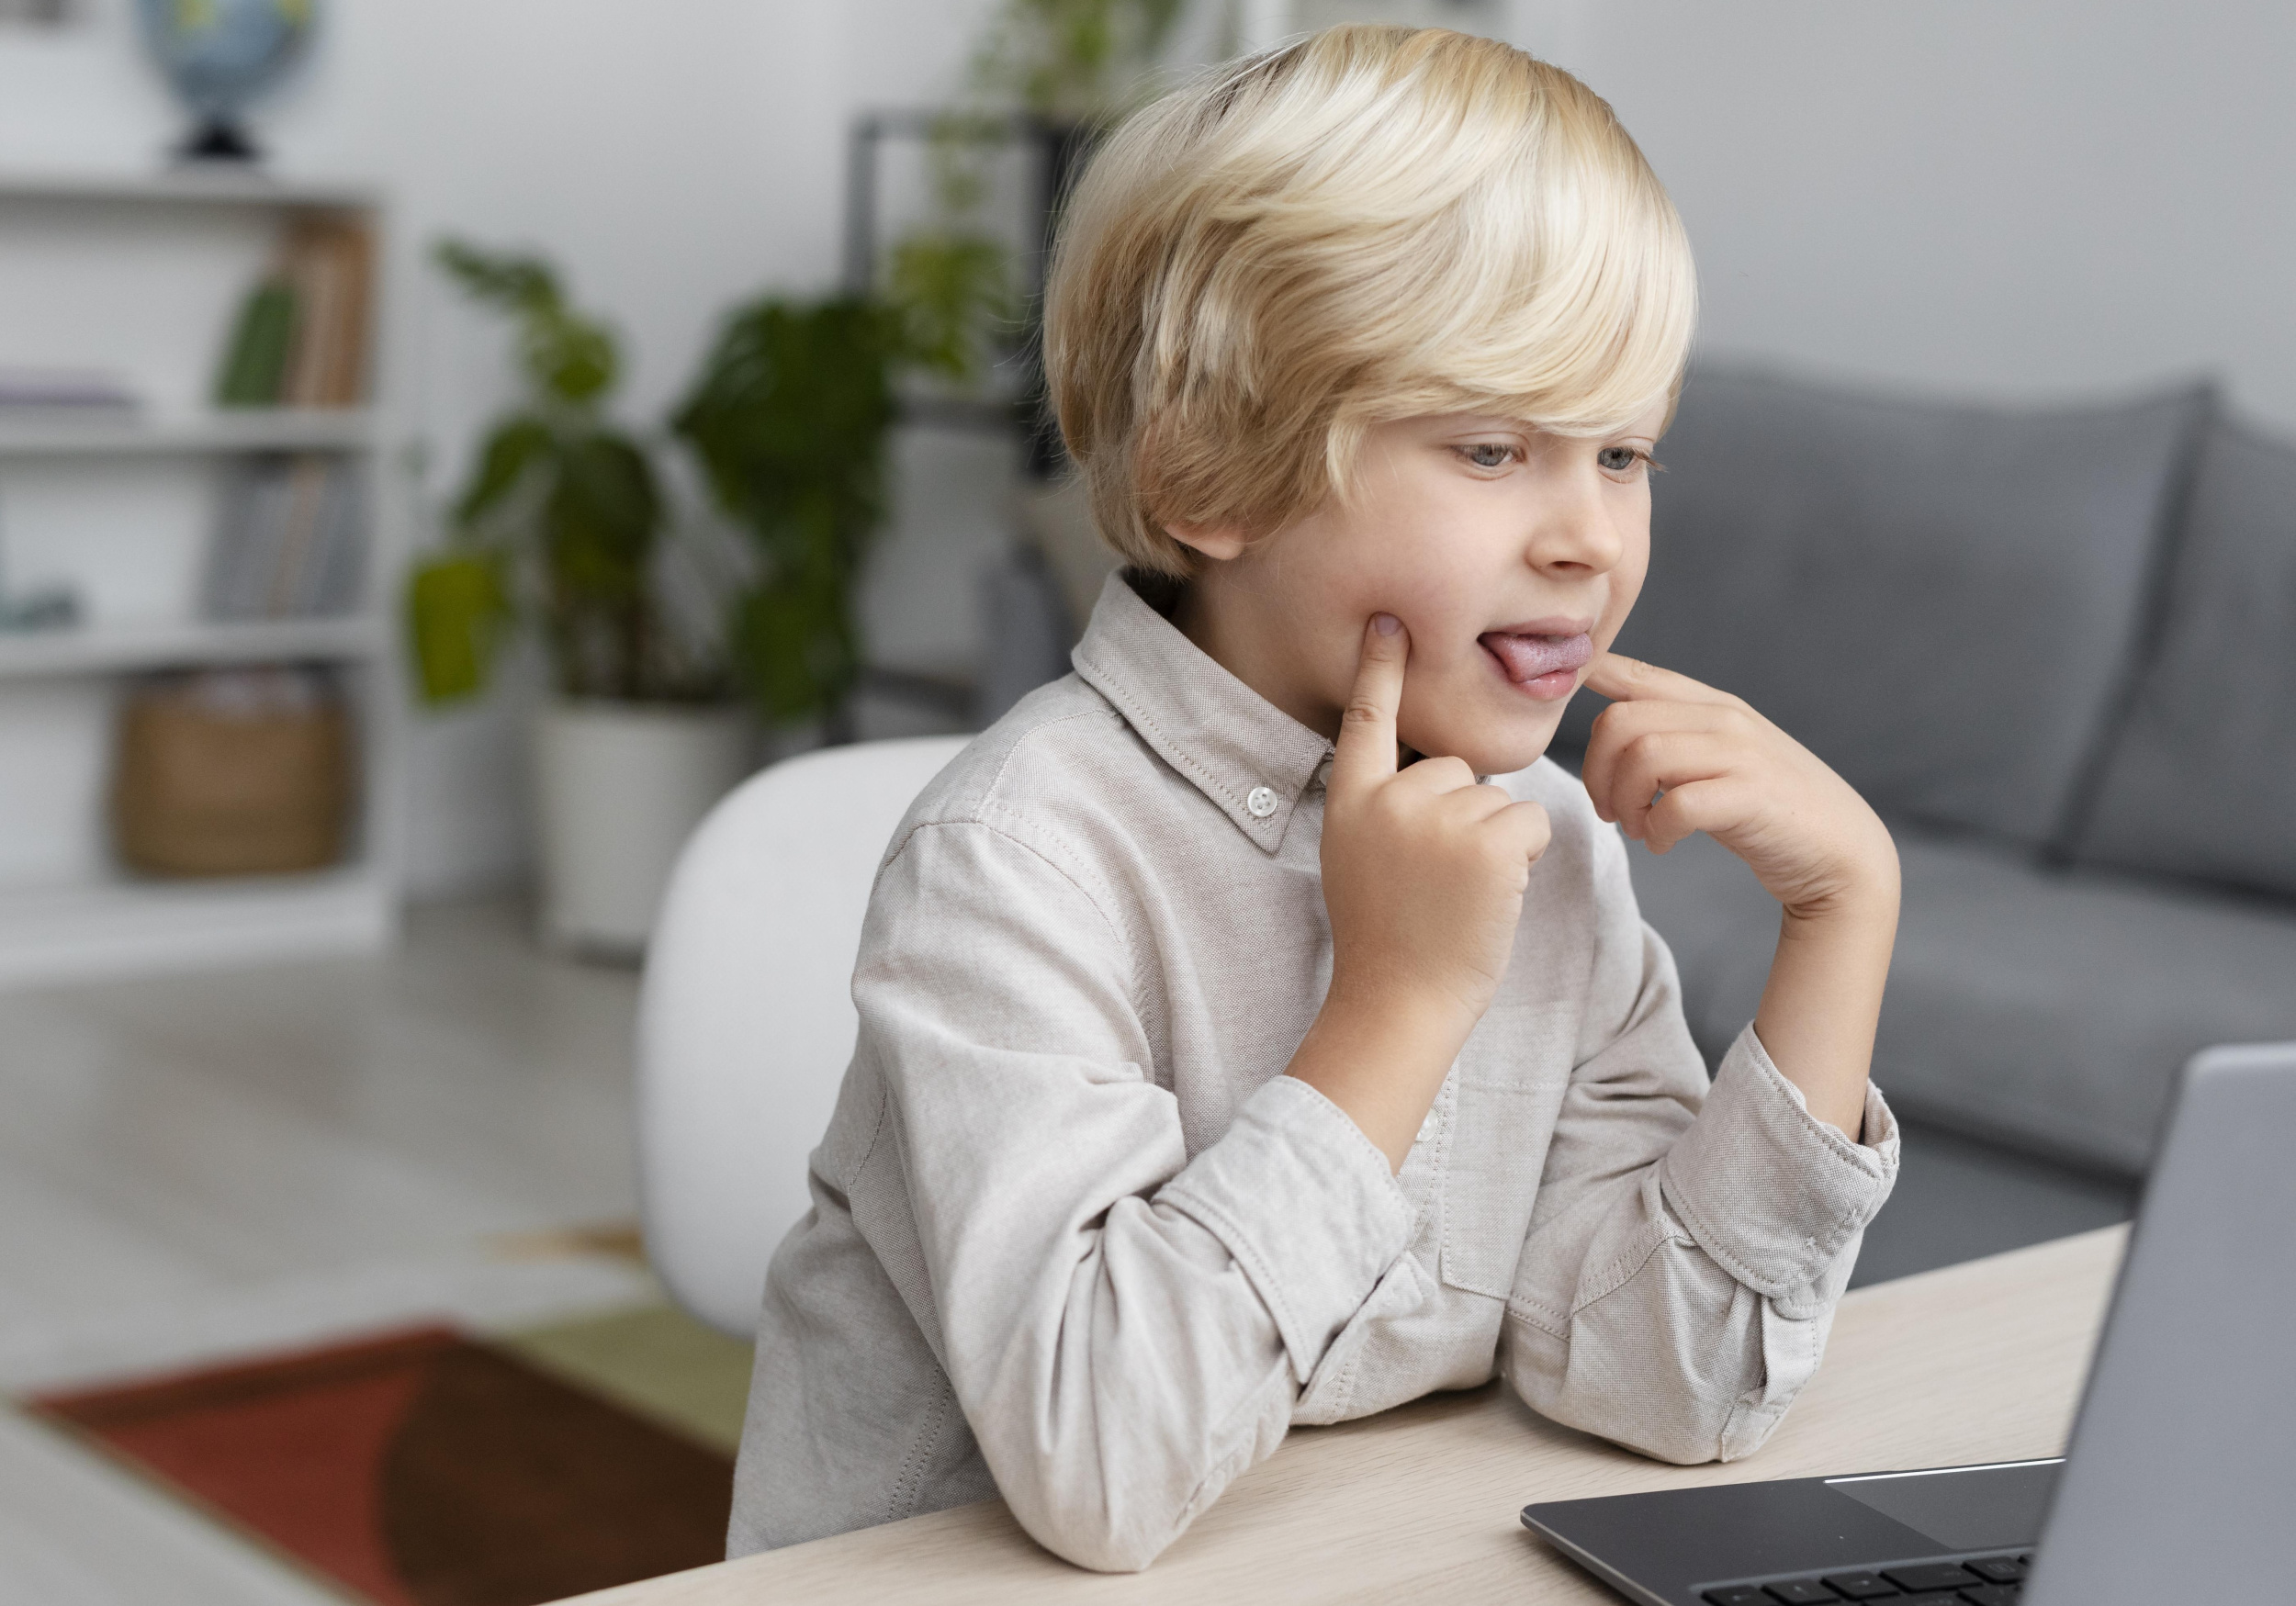 5 adorable-little-boy-doing-online-session-speech-therapy.jpg